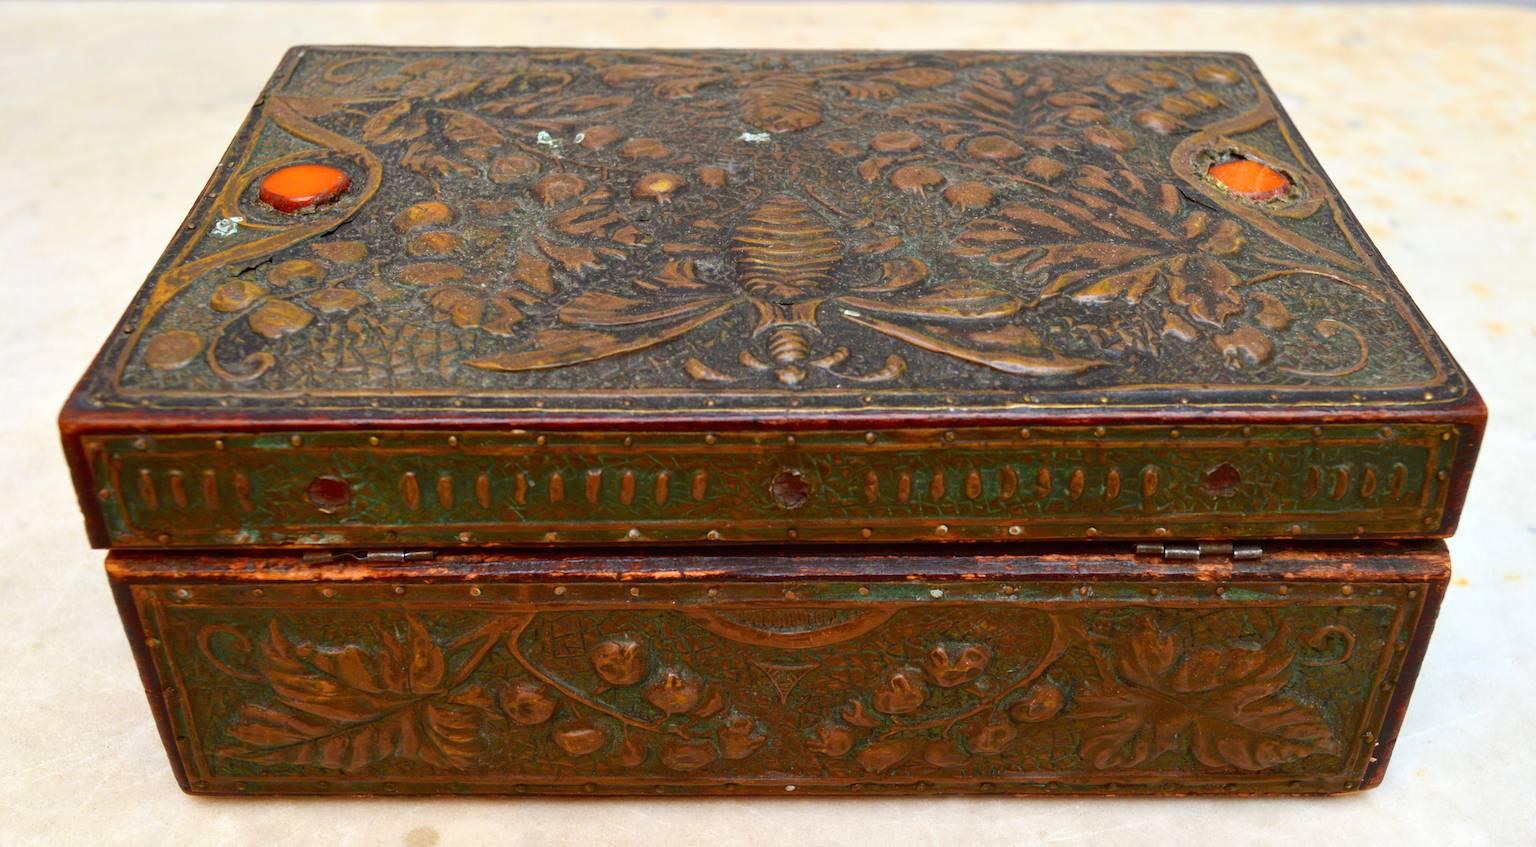 A beautiful example of the workmanship of Art Nouveau accessories; this wood box is covered in hand embossed copper sheeting and set with glass stones.
Made by a Belgian craftsman in the period of the birth of Belgium's monarchy.